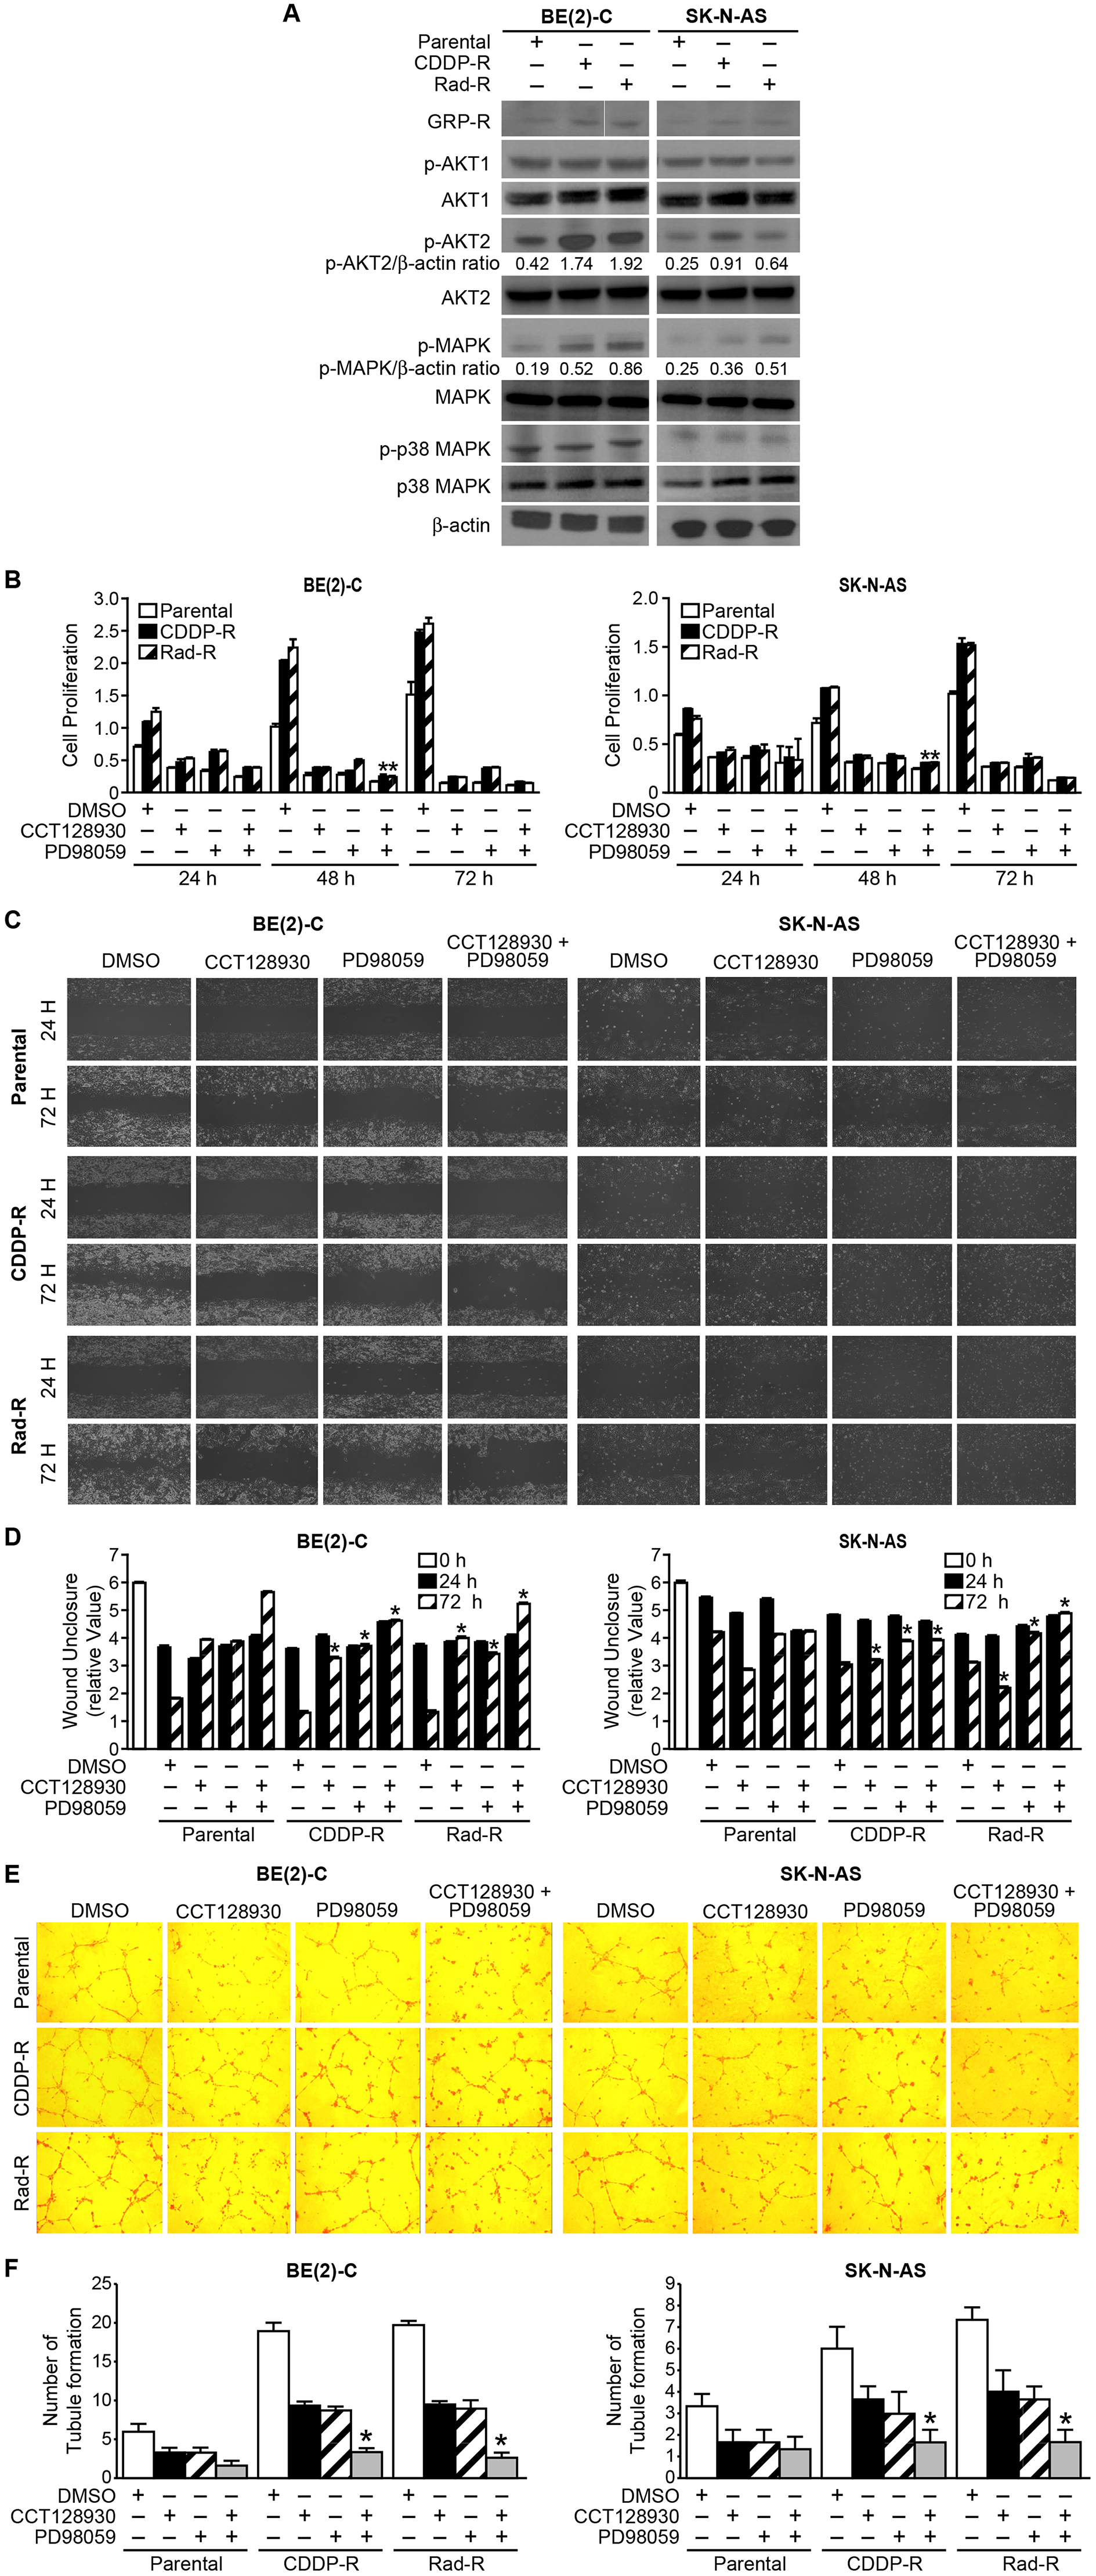 Activation of GRP-R/AKT2 and MAPK signaling pathways in CDDP-R/Rad-R BE(2)-C cells and CDDP-R/Rad-R SK-N-AS cells.